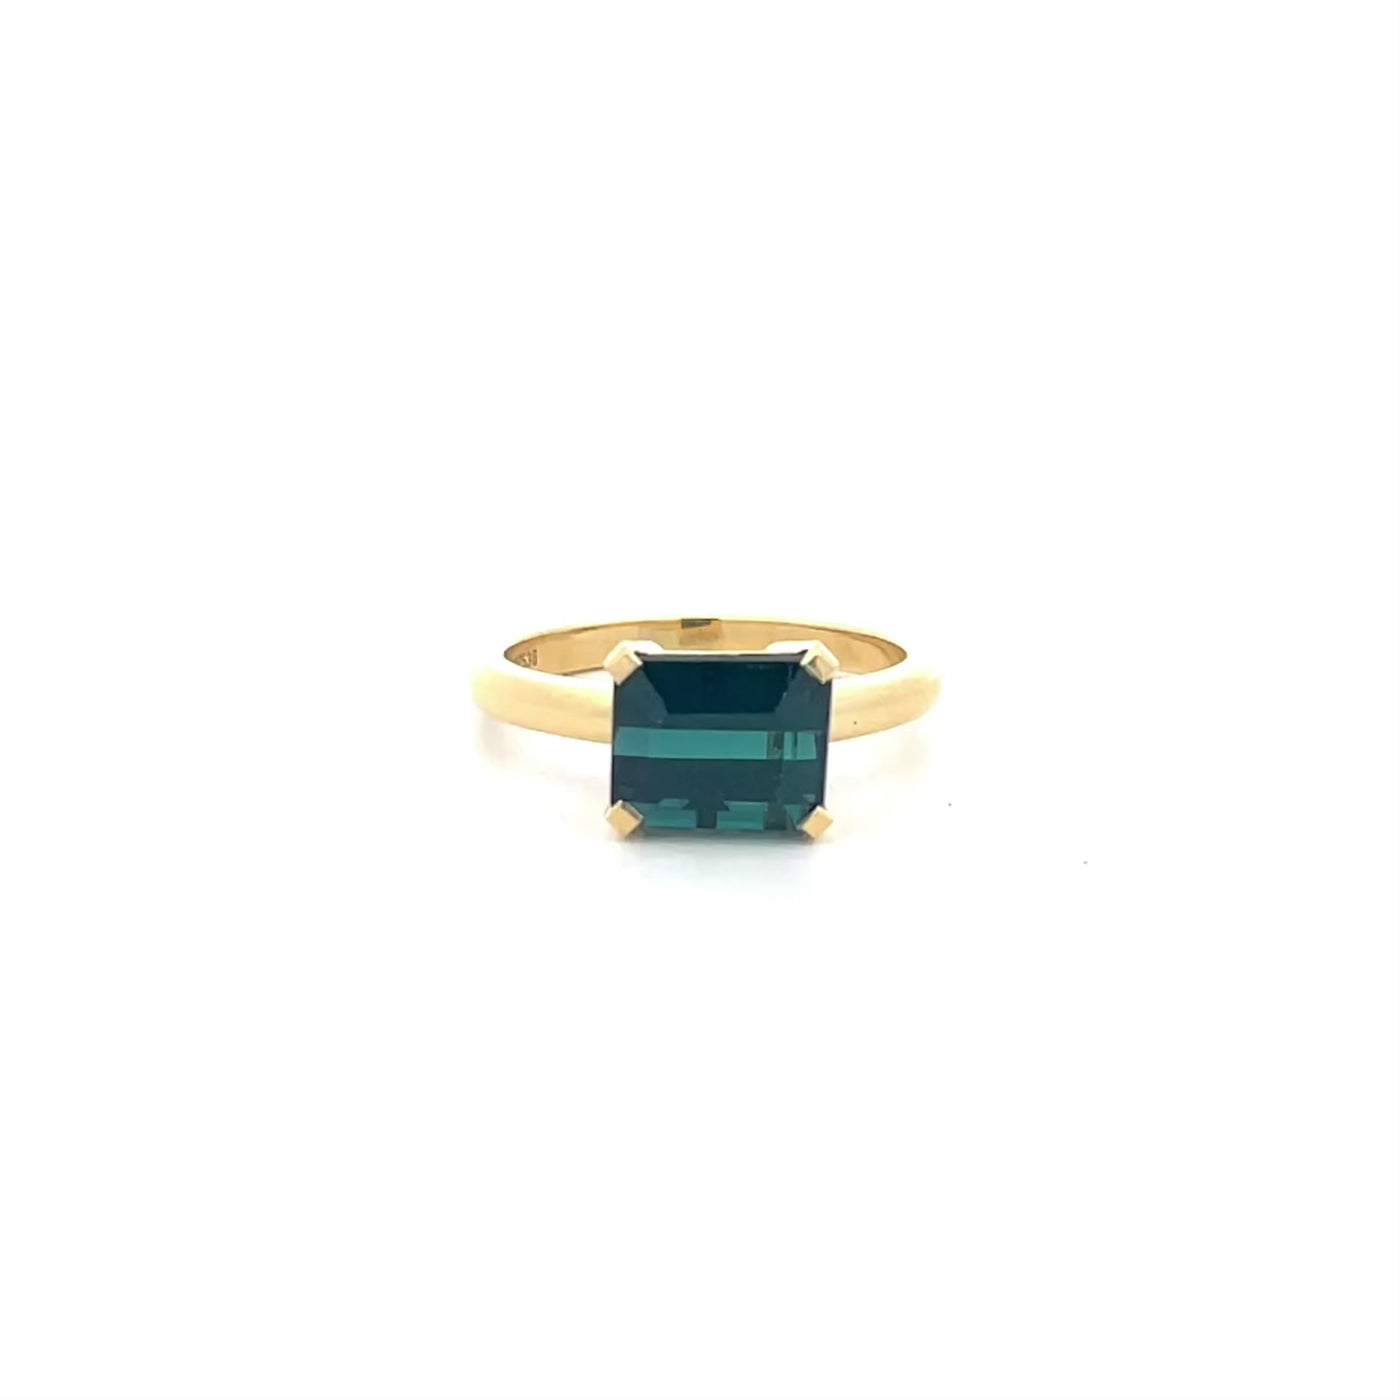 Octagonal Cut Green Tourmaline Solitaire Ring in Yellow Gold | 3.52ct